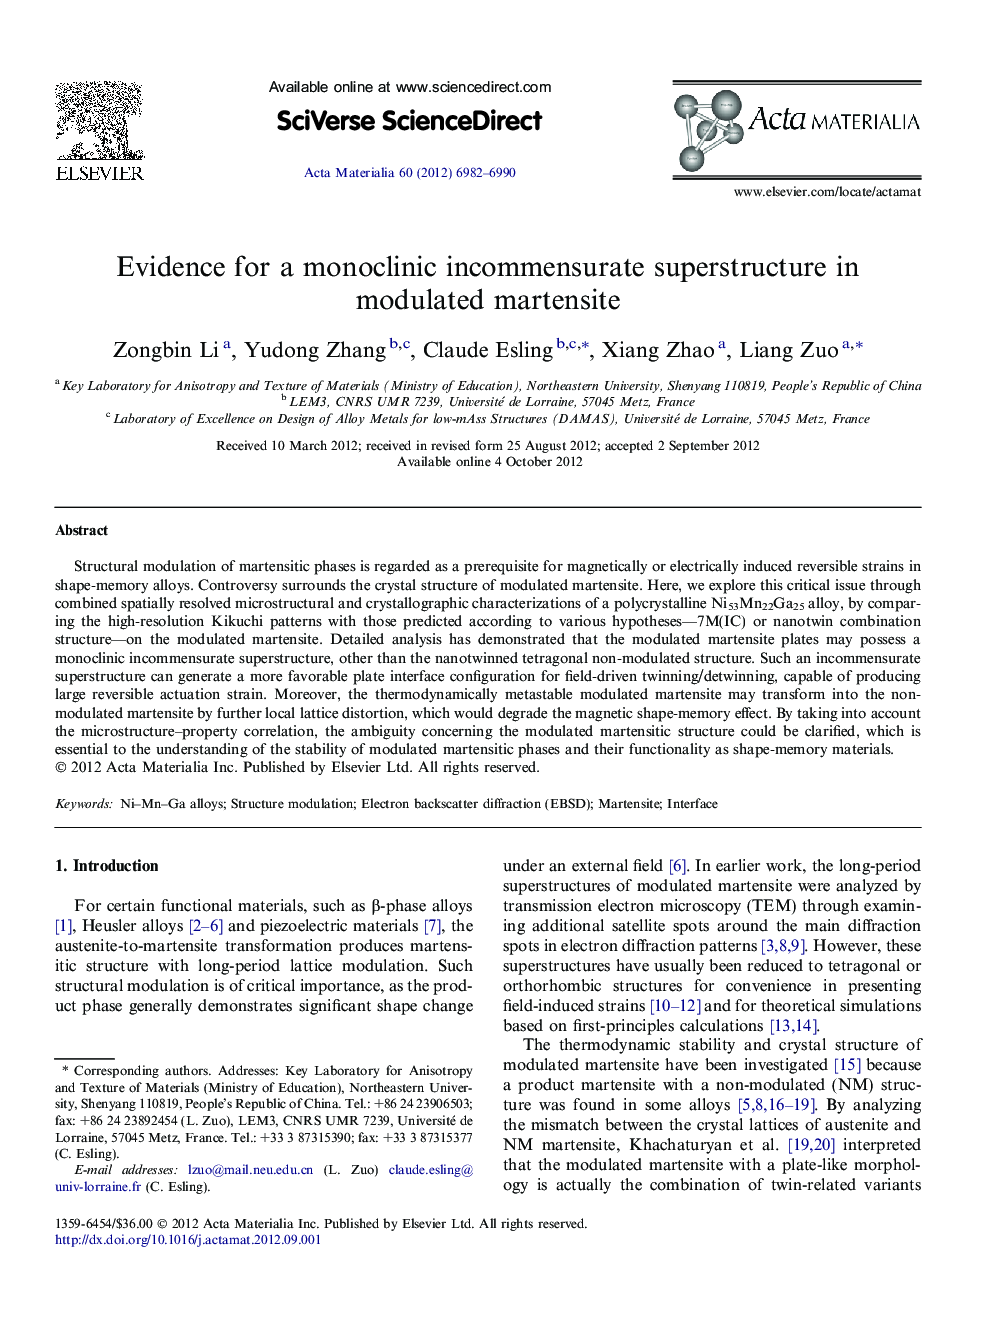 Evidence for a monoclinic incommensurate superstructure in modulated martensite